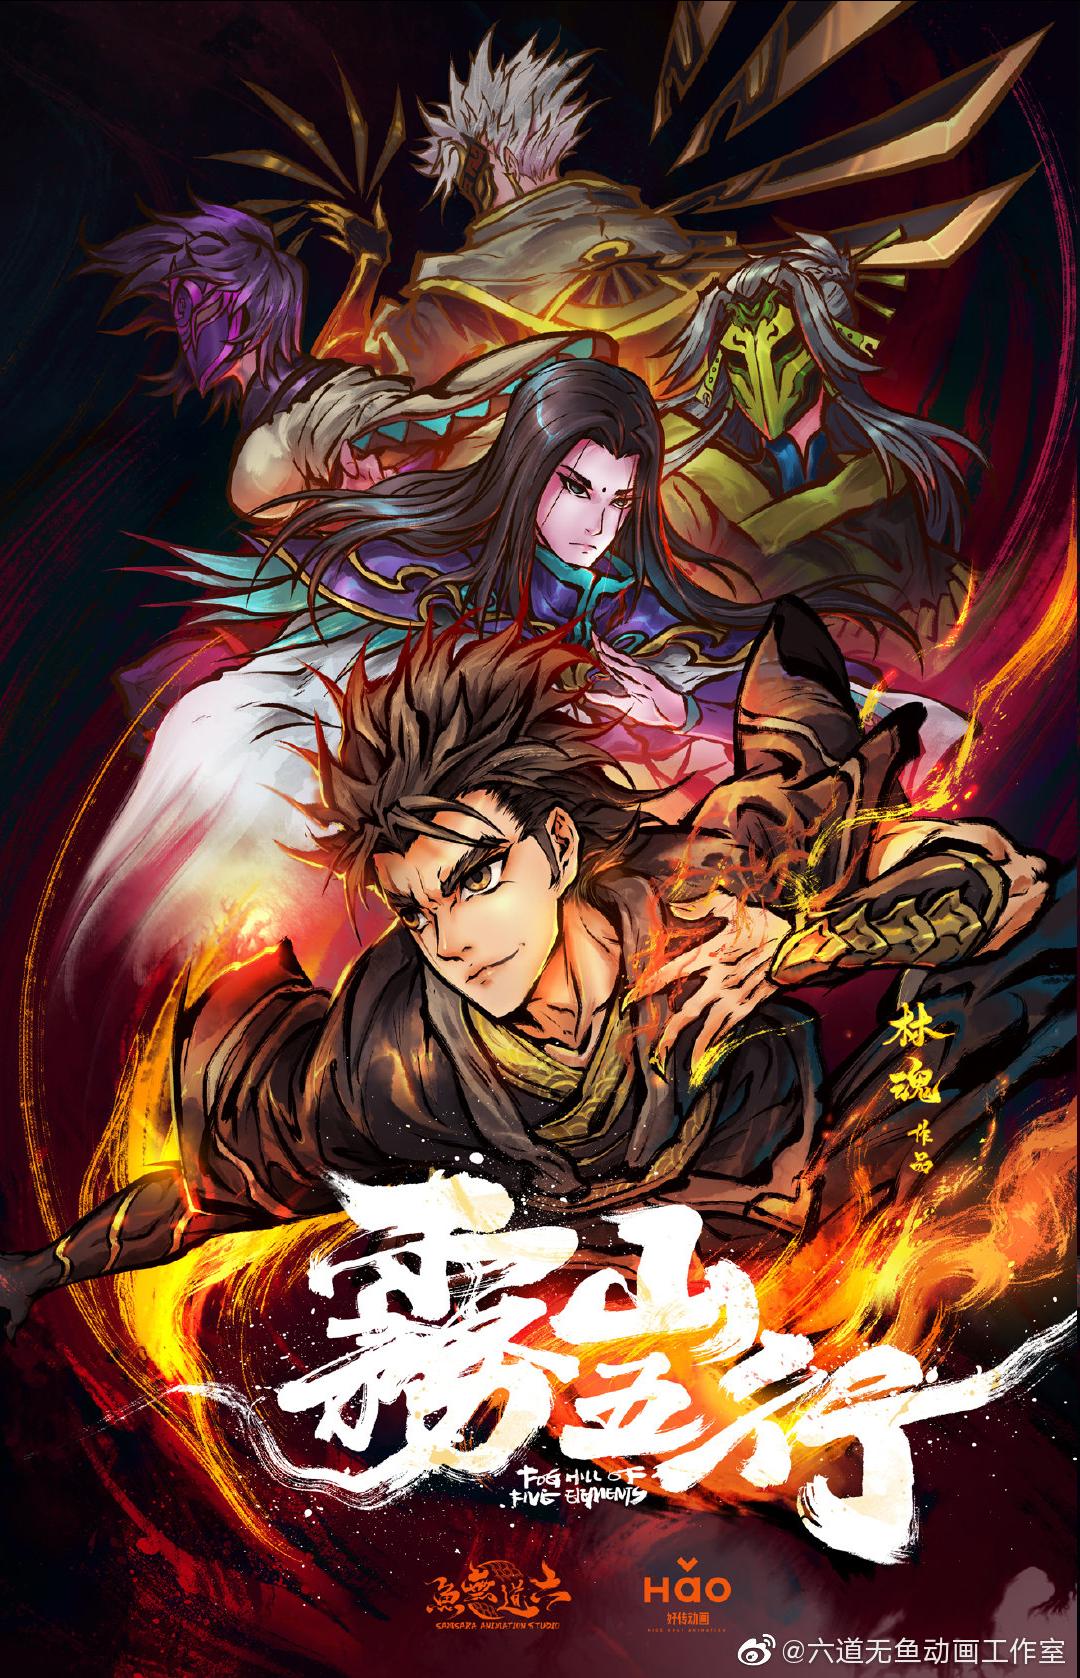 Fog Hill of Five Elements VOSTFR